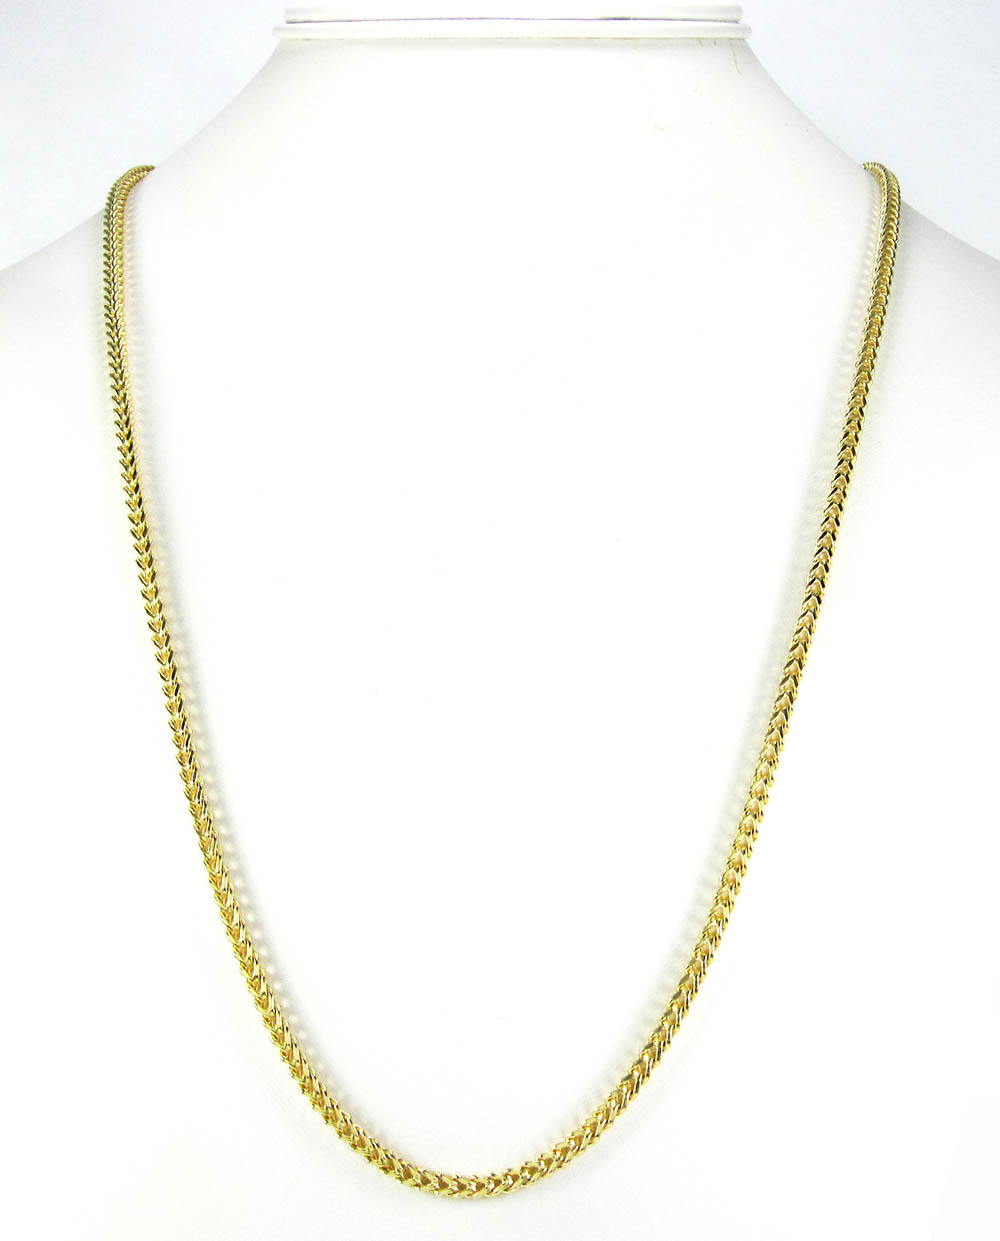 14k yellow gold smooth cut franco link chain 22-34 inch 3mm